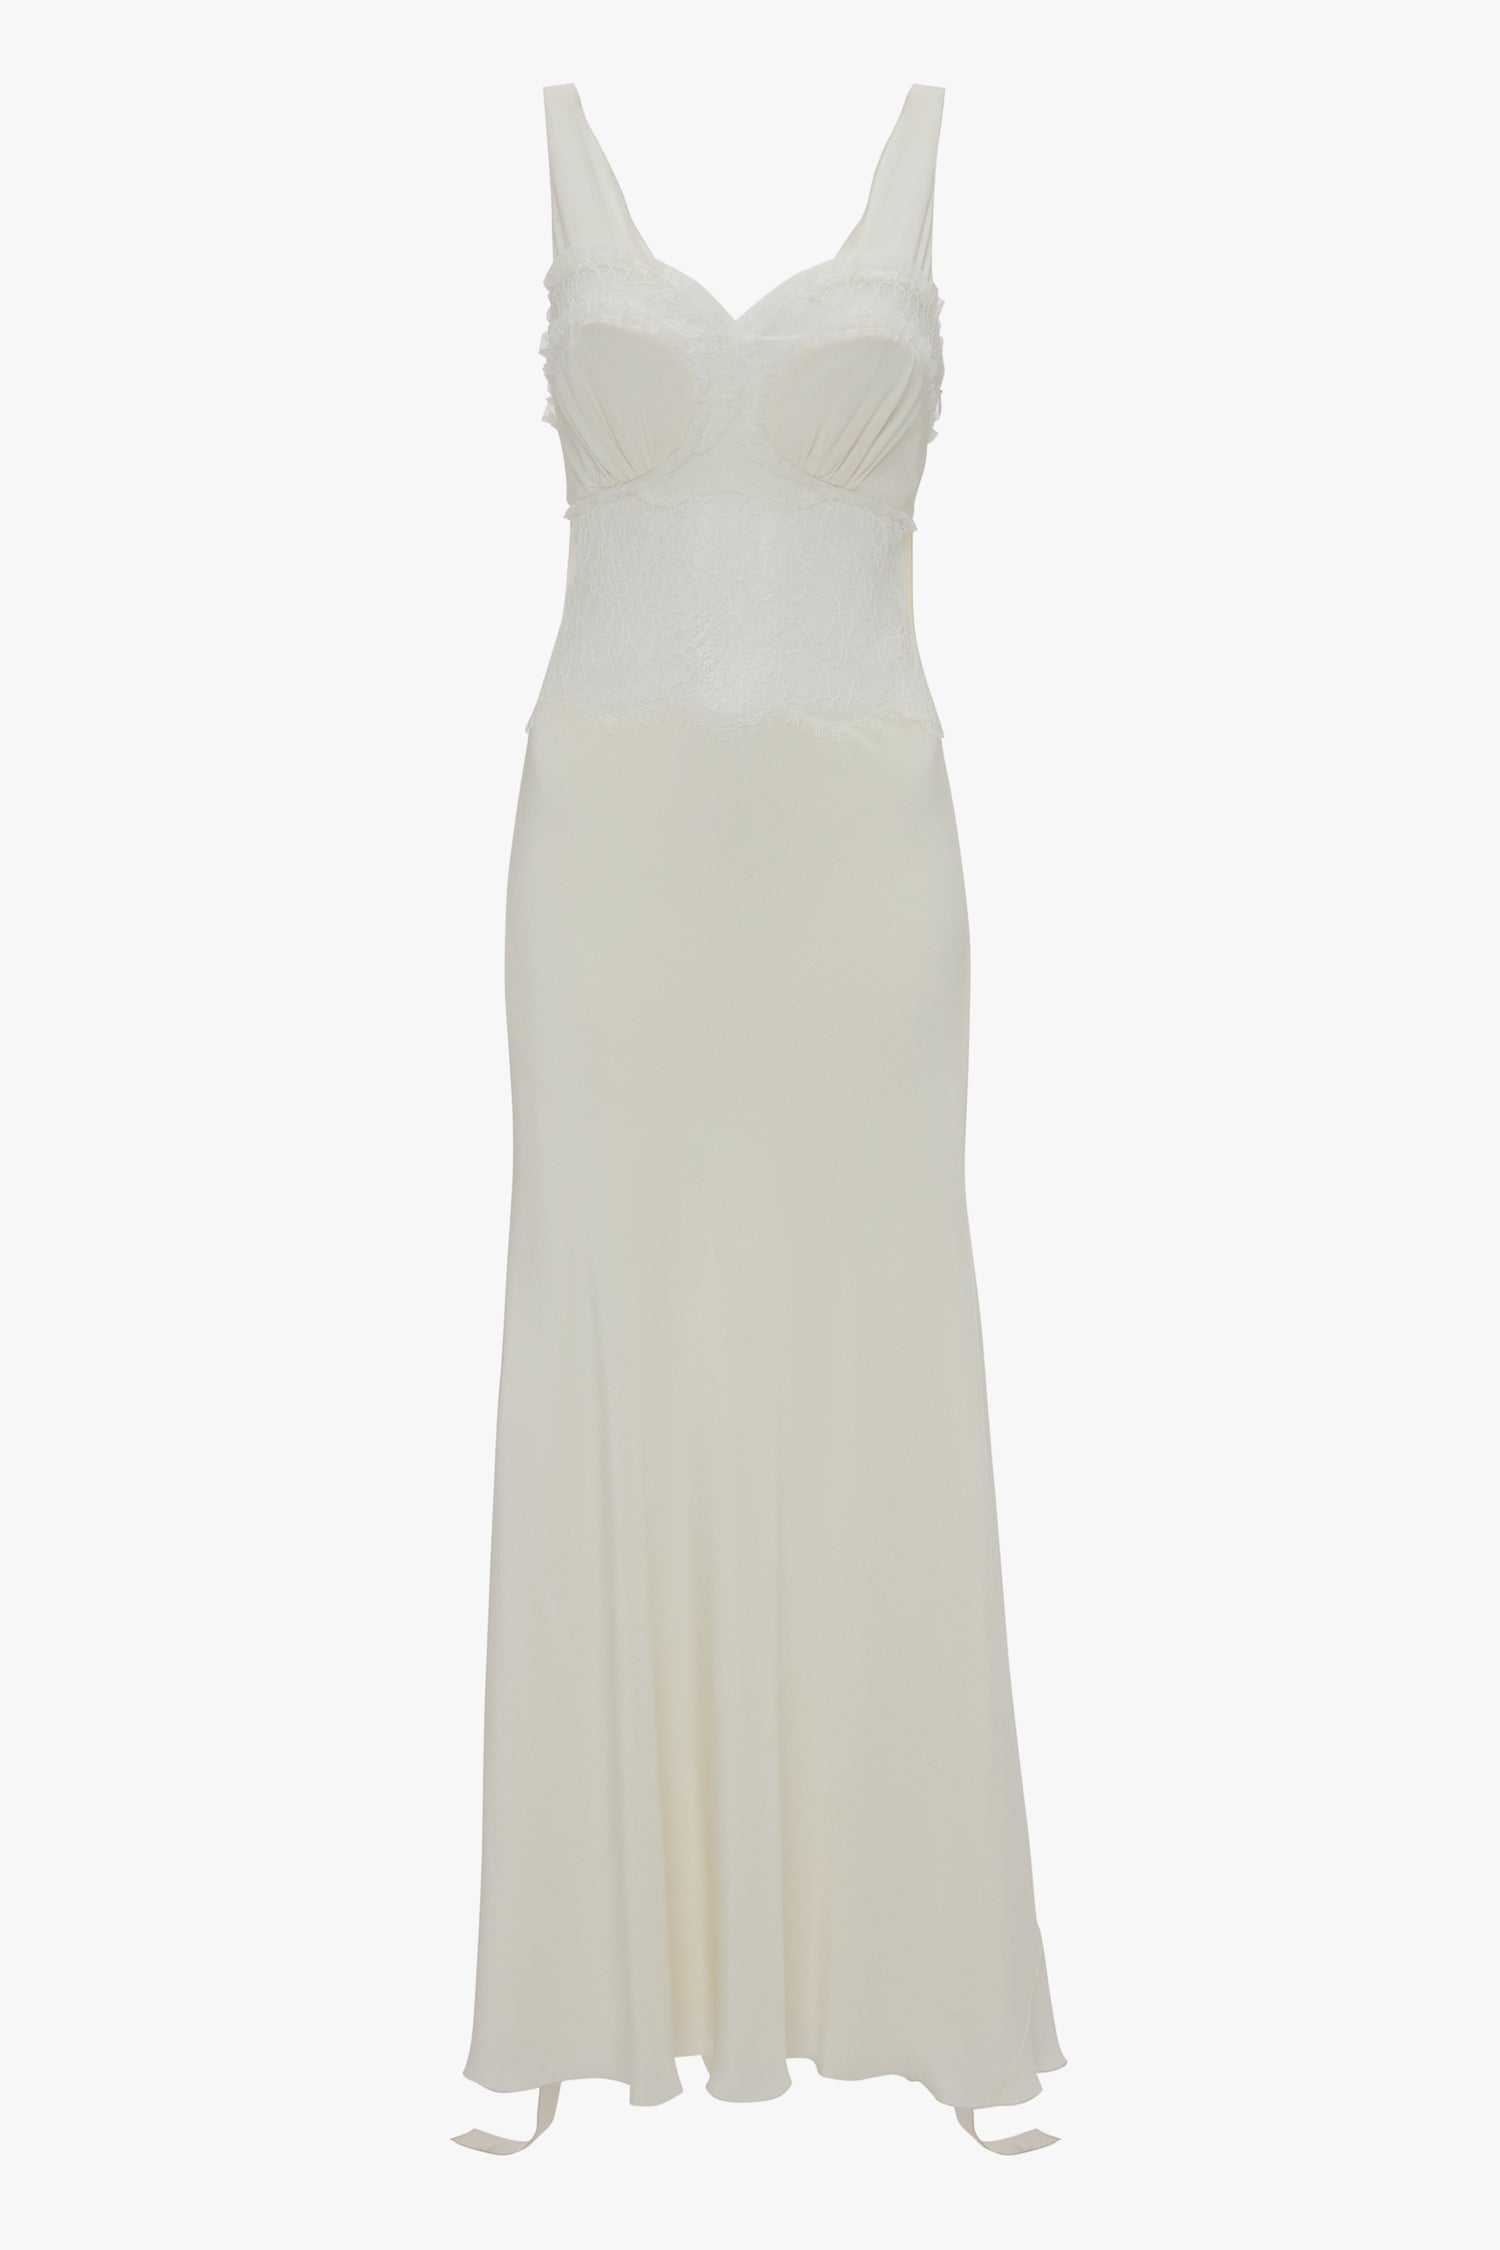 A long, off-white sleeveless dress with thin shoulder straps, a fitted bodice, and a flowing skirt. The Ruffle Detail Midi Dress In Ivory by Victoria Beckham features tactile lace detail on the bodice and a slight sheen to the fabric, epitomizing the charm found in elegant midi dresses.